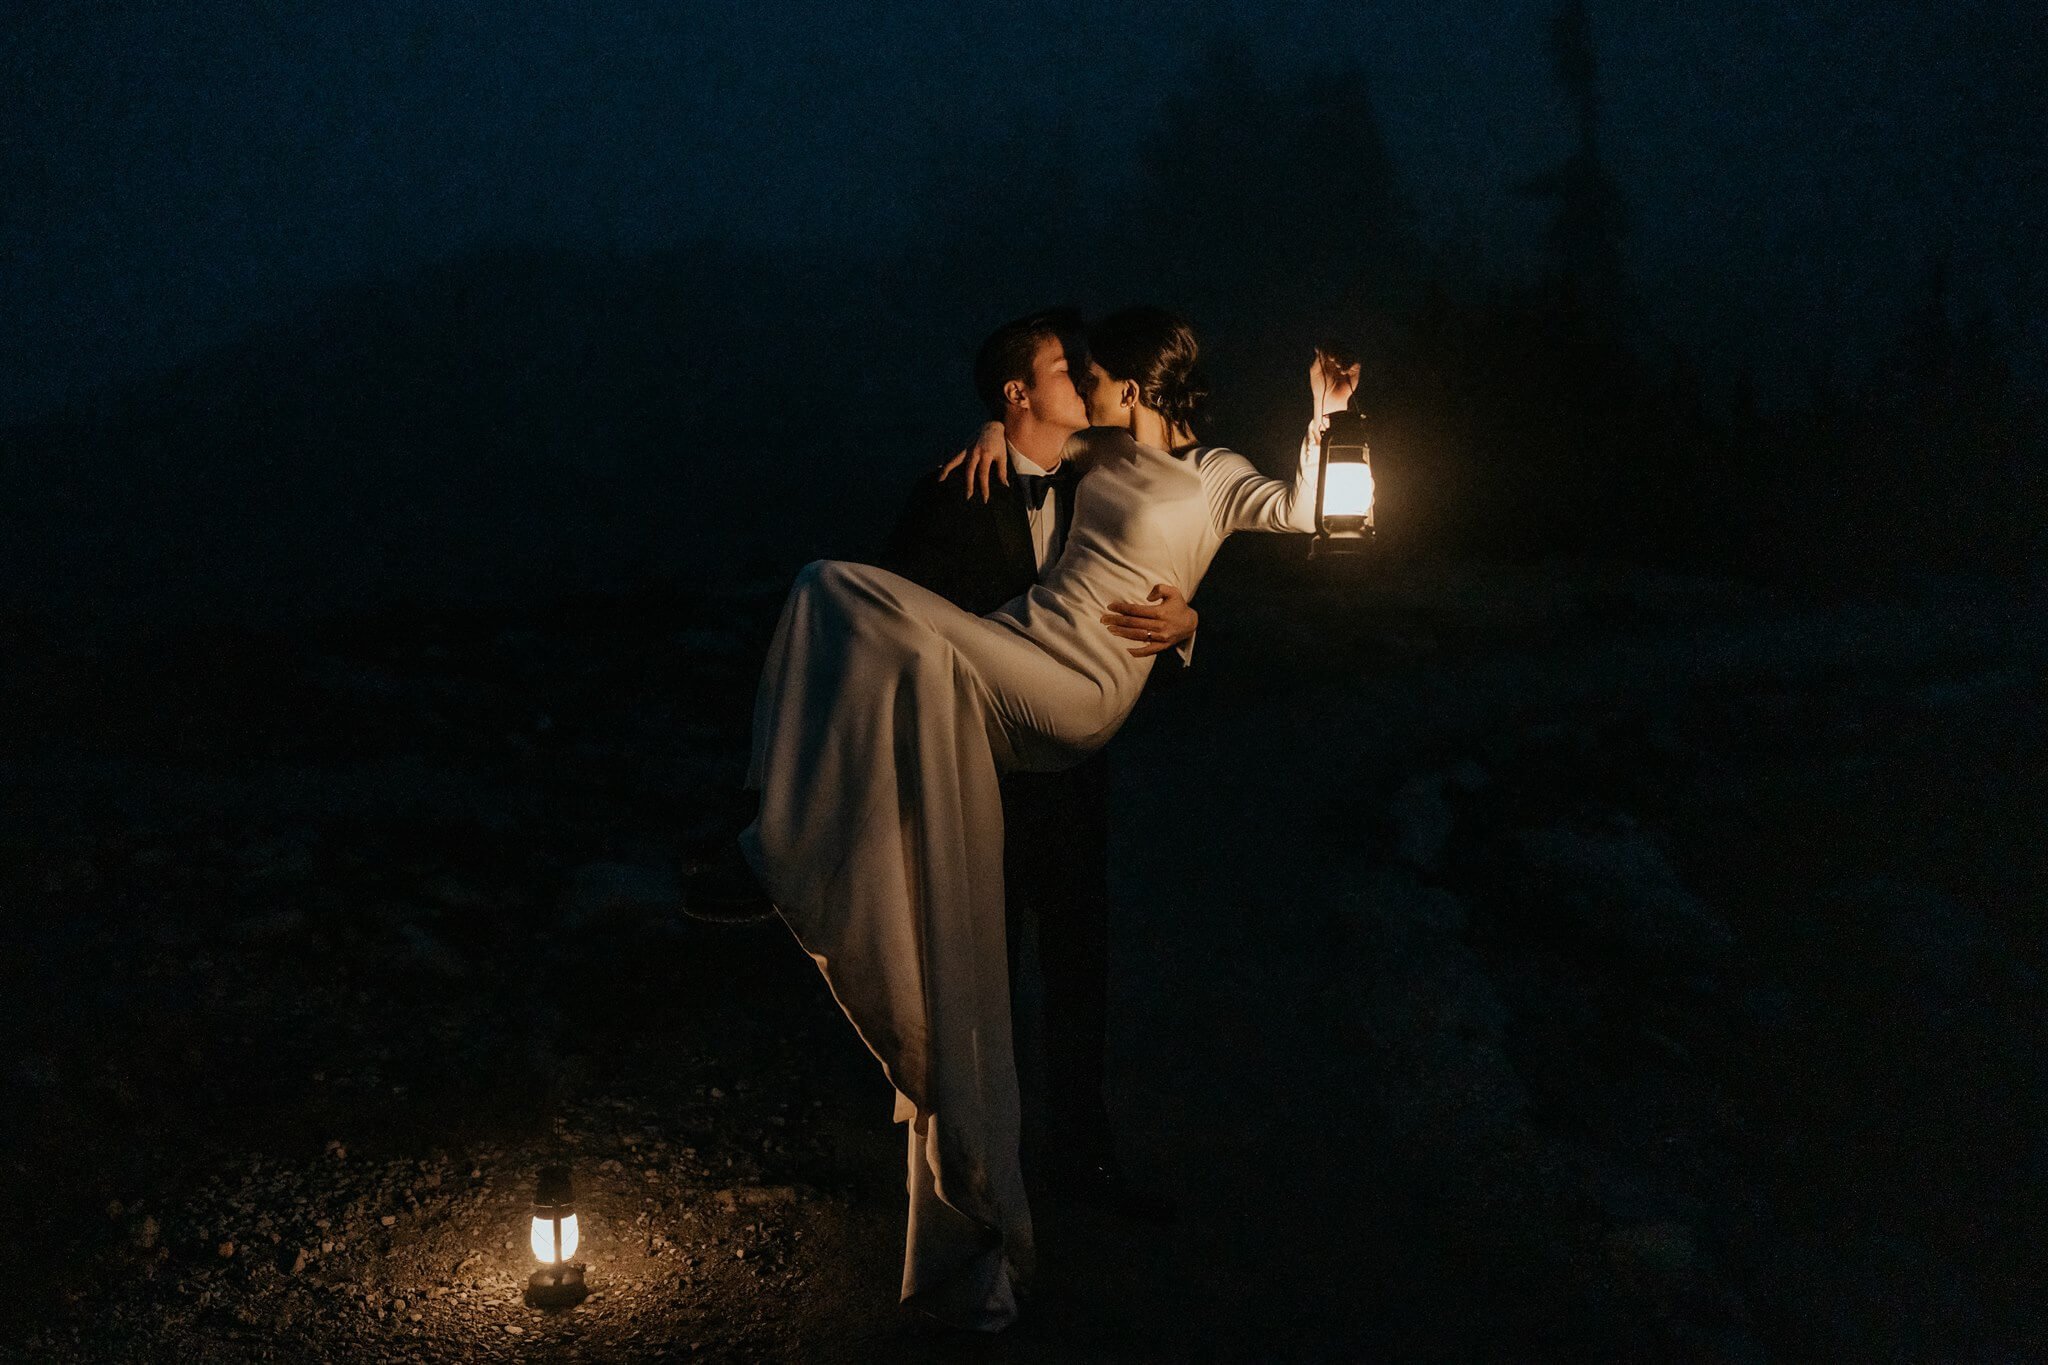 Groom carrying bride while holding lanterns in the dark